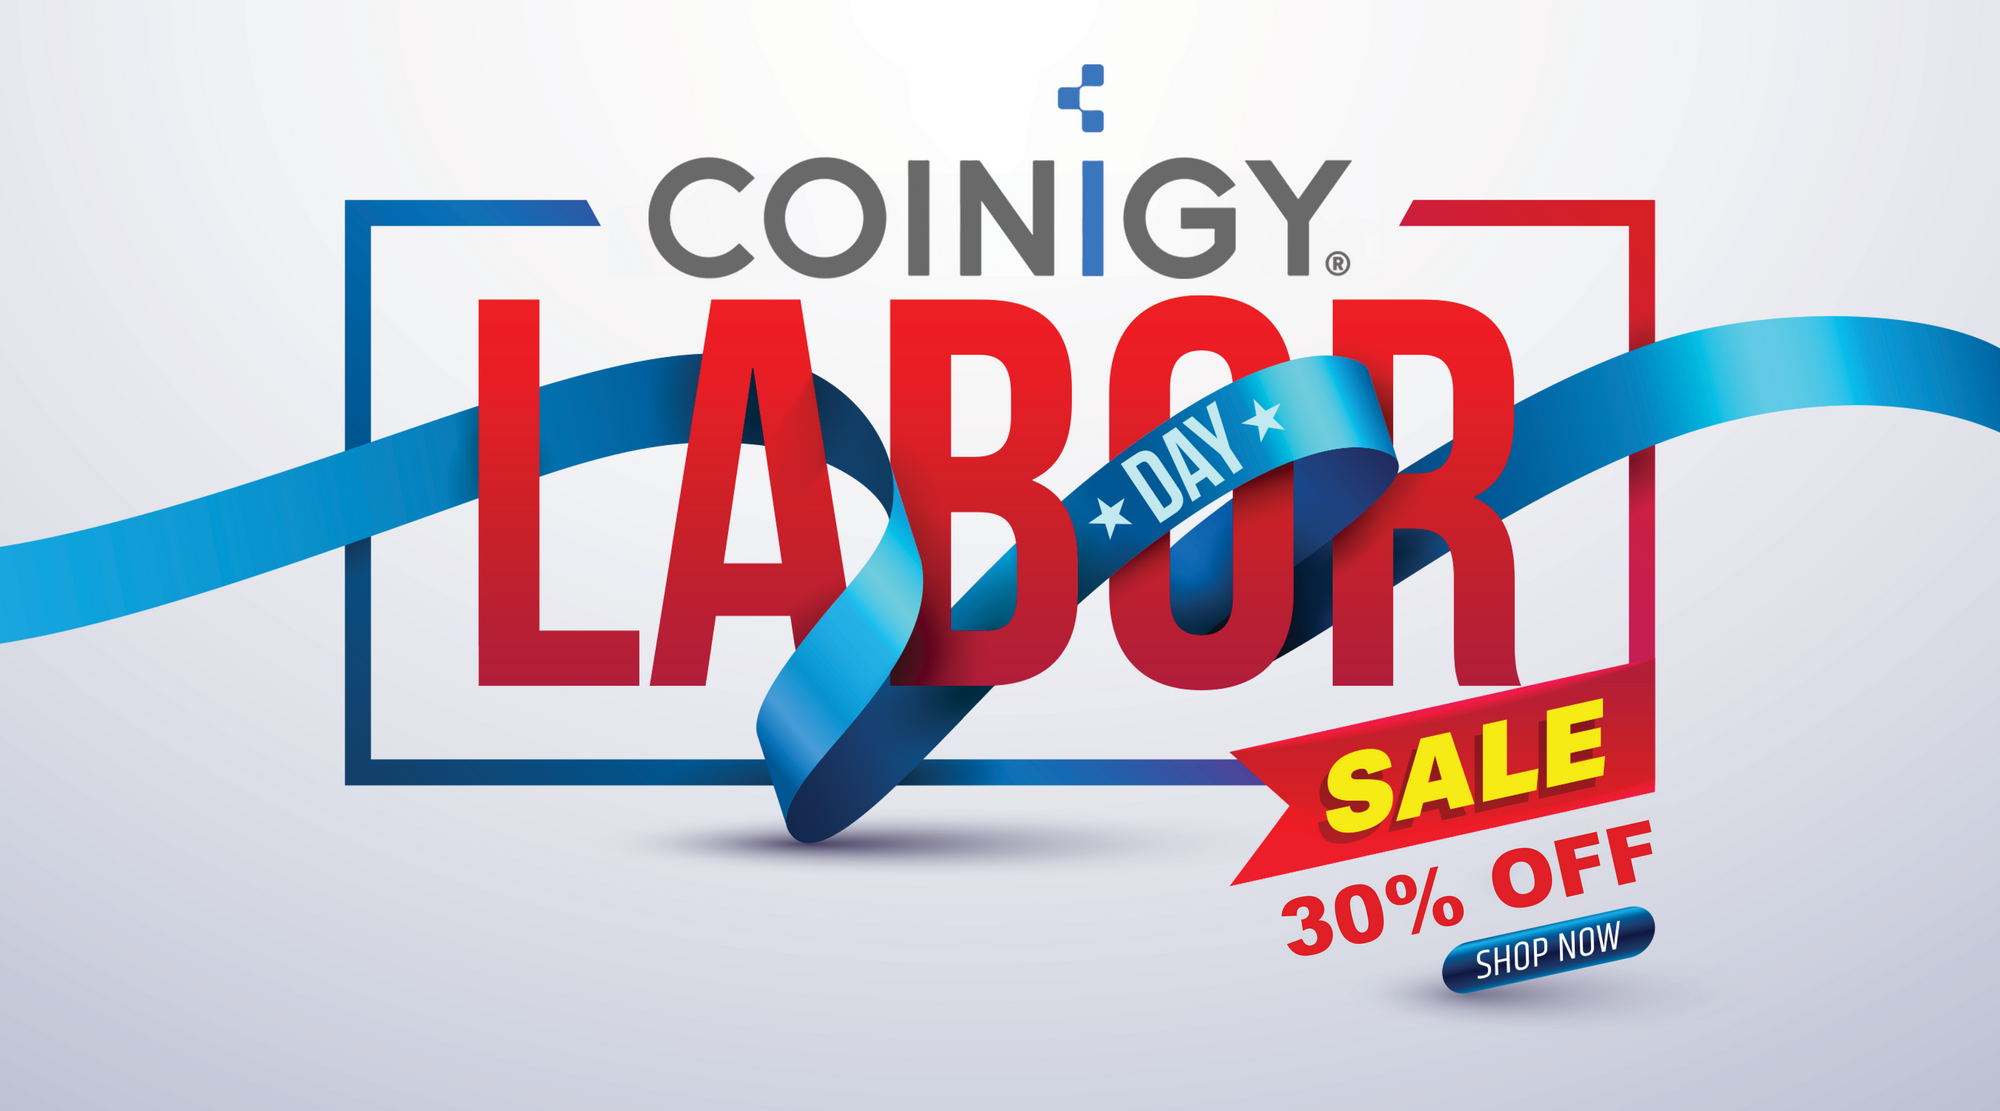 Coinigy Labor Day Weekend Sale!